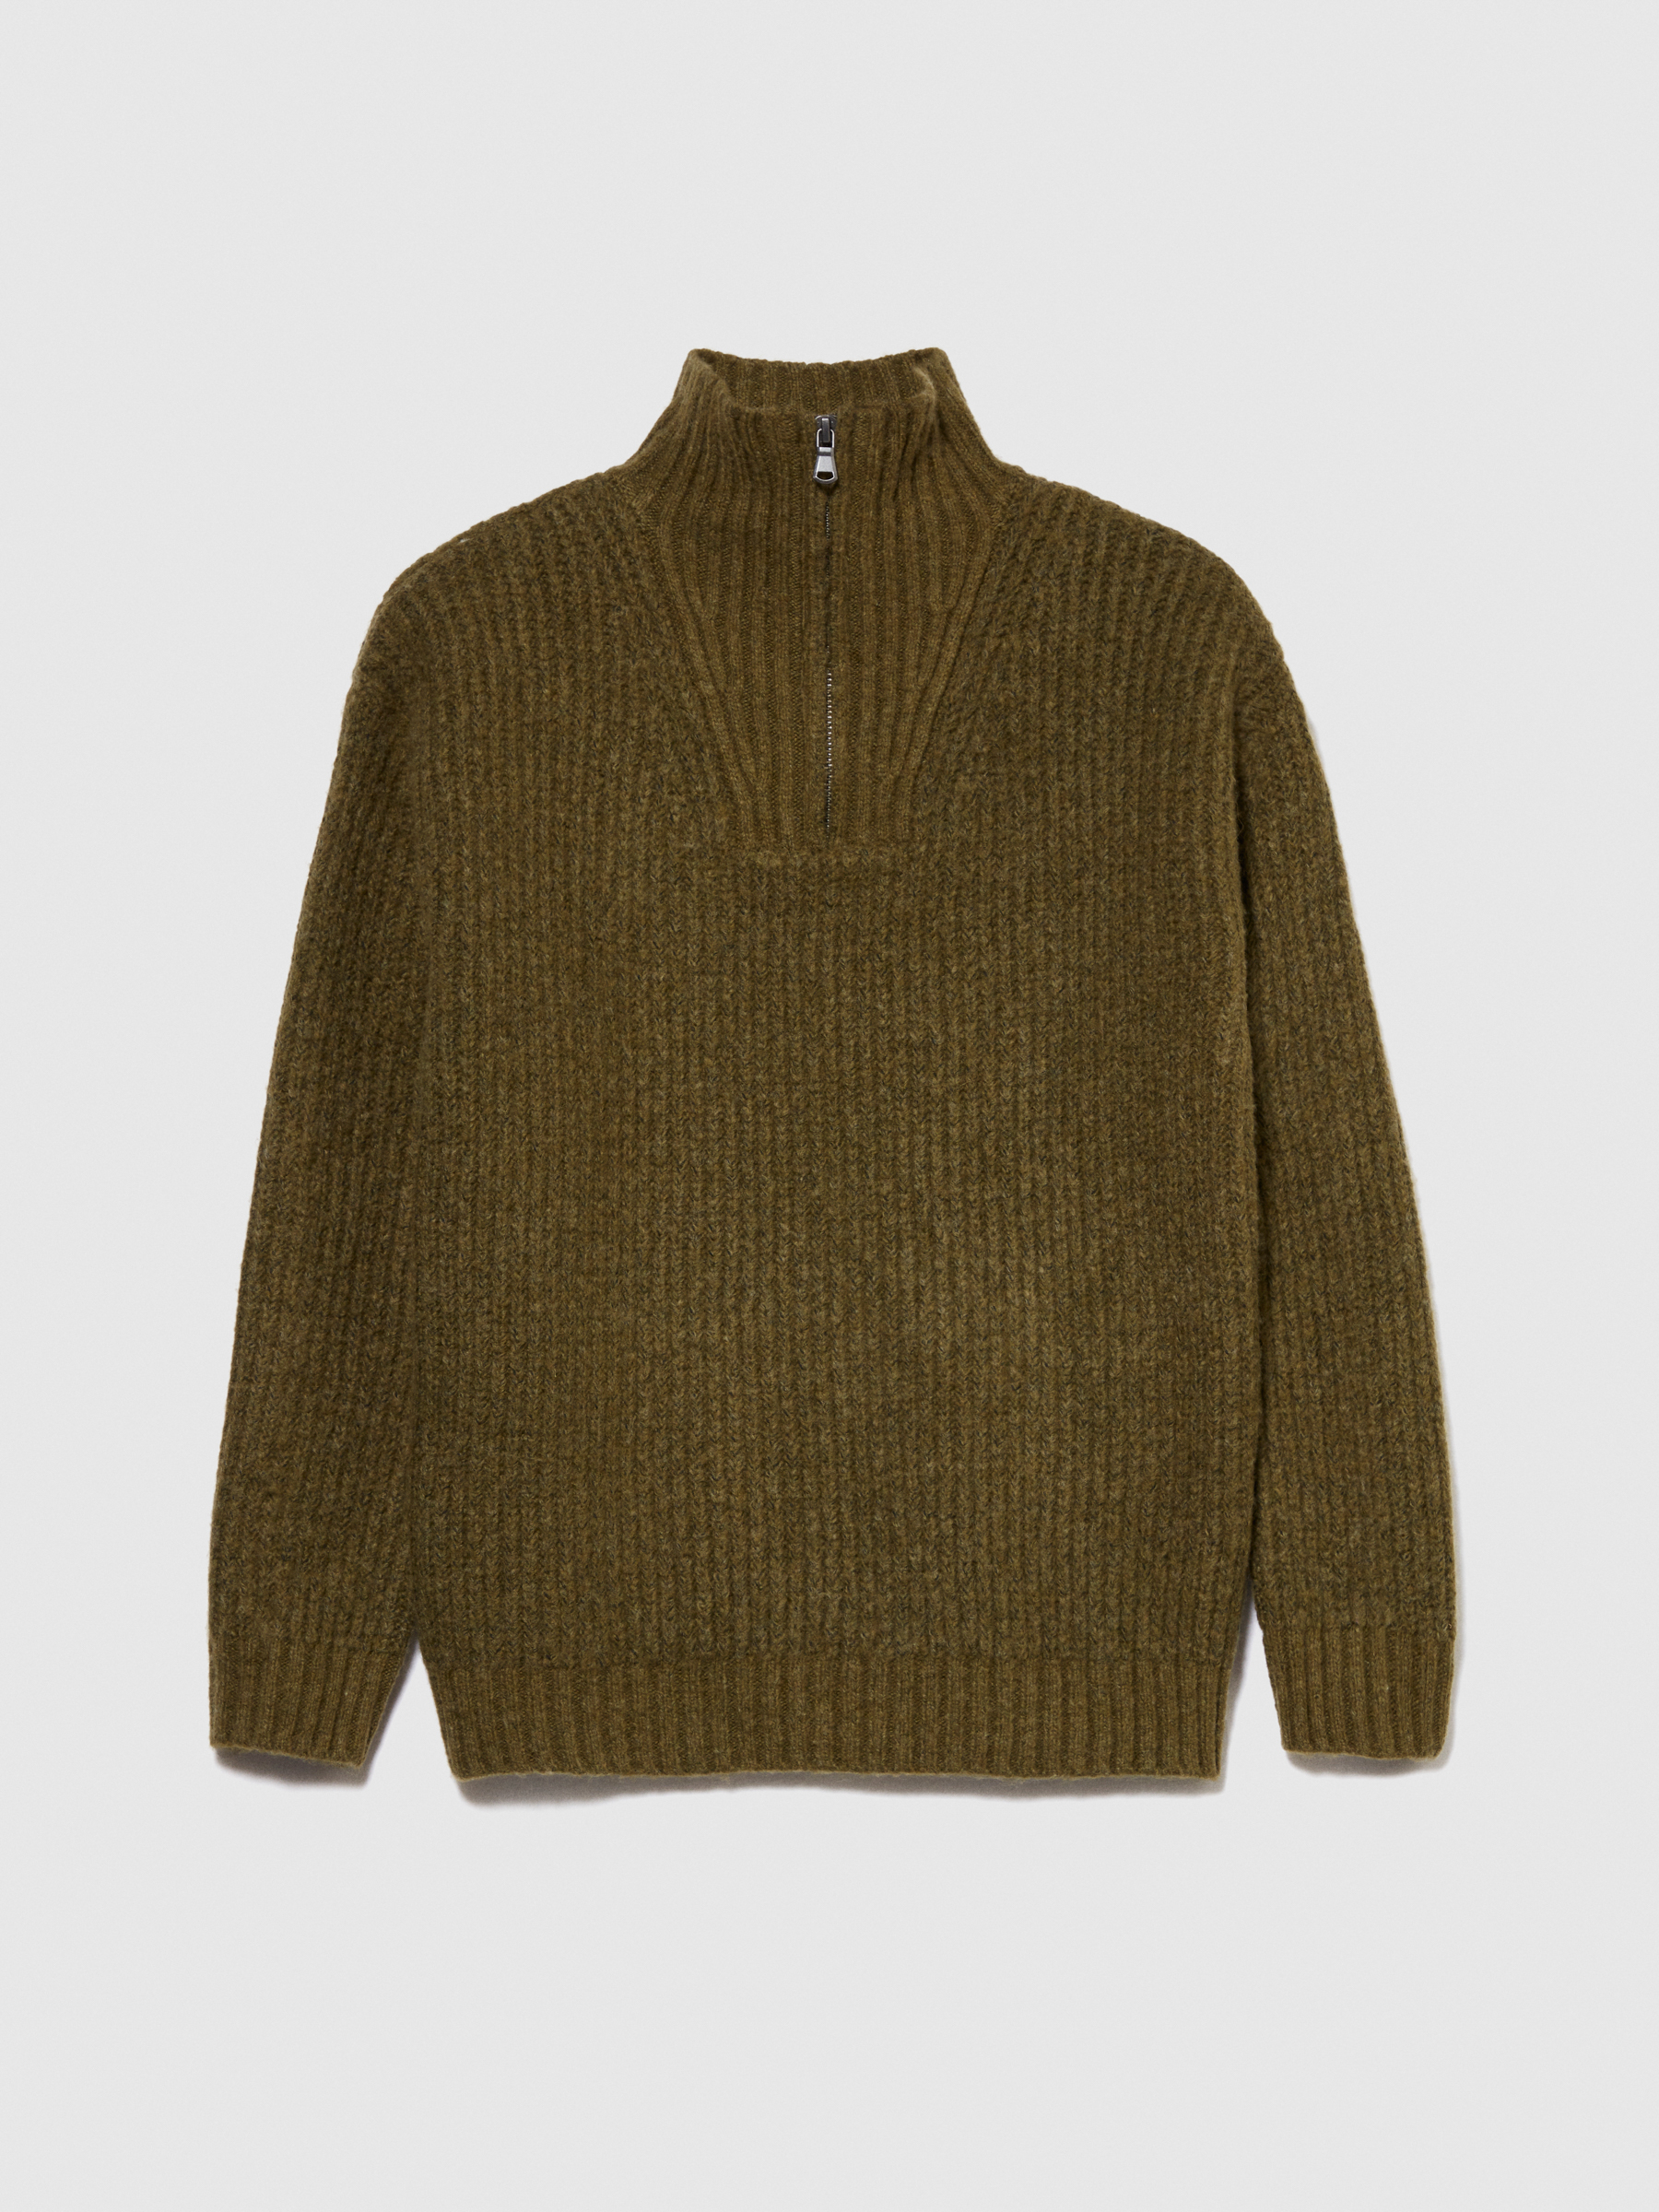 Sisley Young - Sweater With High Neck, Man, Military Green, Size: S